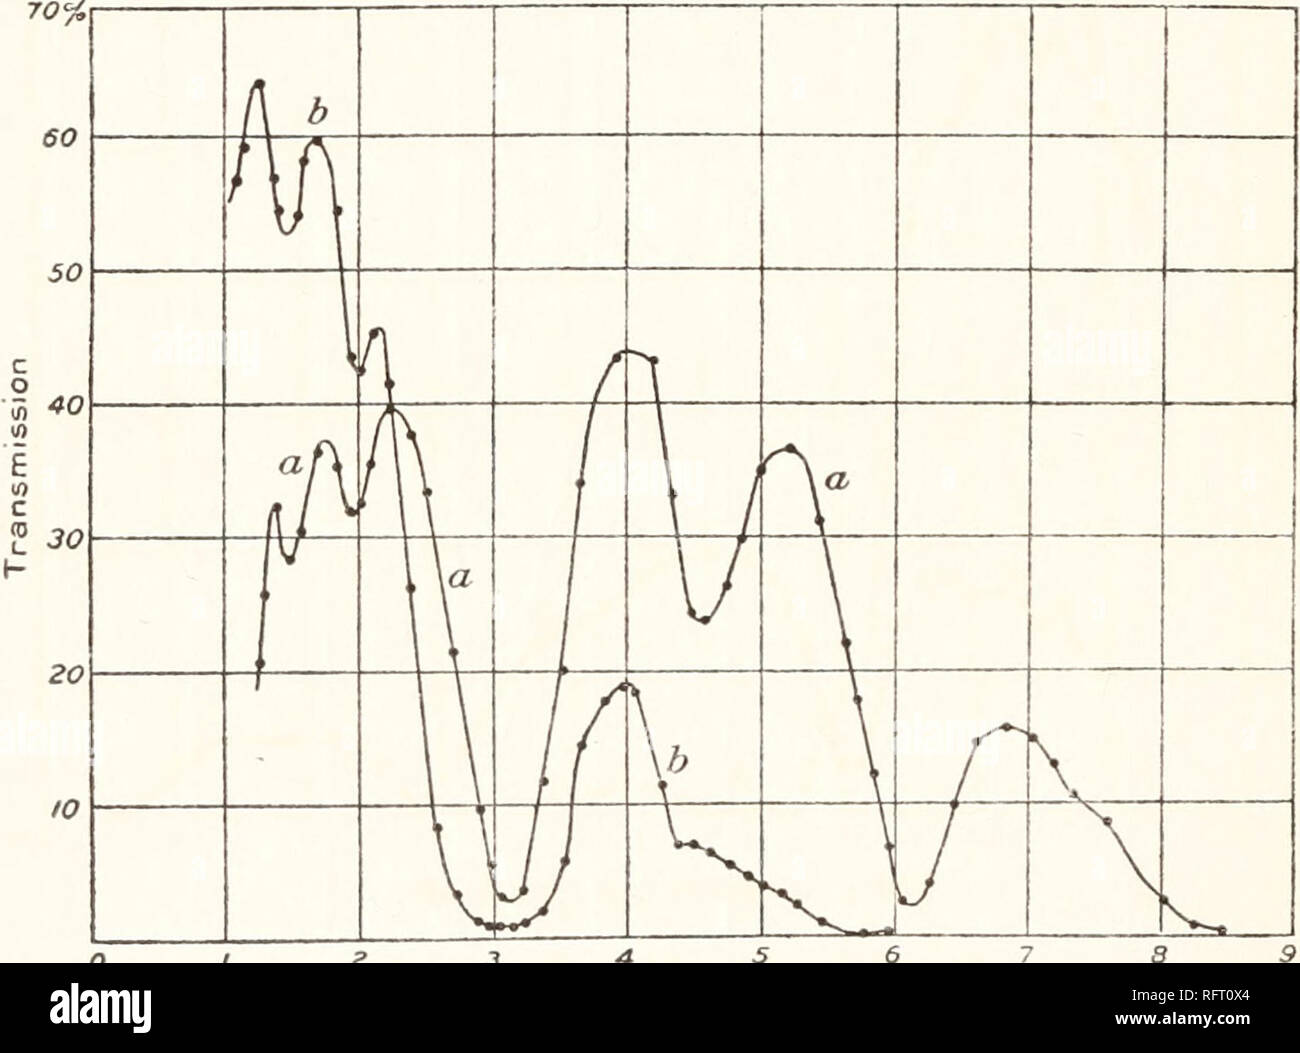 . Carnegie Institution of Washington publication. 24 INFRA-RED TRANSMISSION SPECTRA. 3, and 4.75 /x, beyond which point the opacity becomes too great for further exploration. The crystals obtainable were small, so that the section was not quite long enough to cover the whole slit. STILBITE (CaAl2Si6Ow+6H2O). (Transparent section cut perpendicular to optic axis. f = o.ii. Curve a, fig. 7.) The stilbite curve is to be noticed for its great transparency with all the water bands superposed. There do not appear to be any important bands belonging to the mineral itself. POTASSIUM ALUM (K2SO4Al2(SO4) Stock Photo